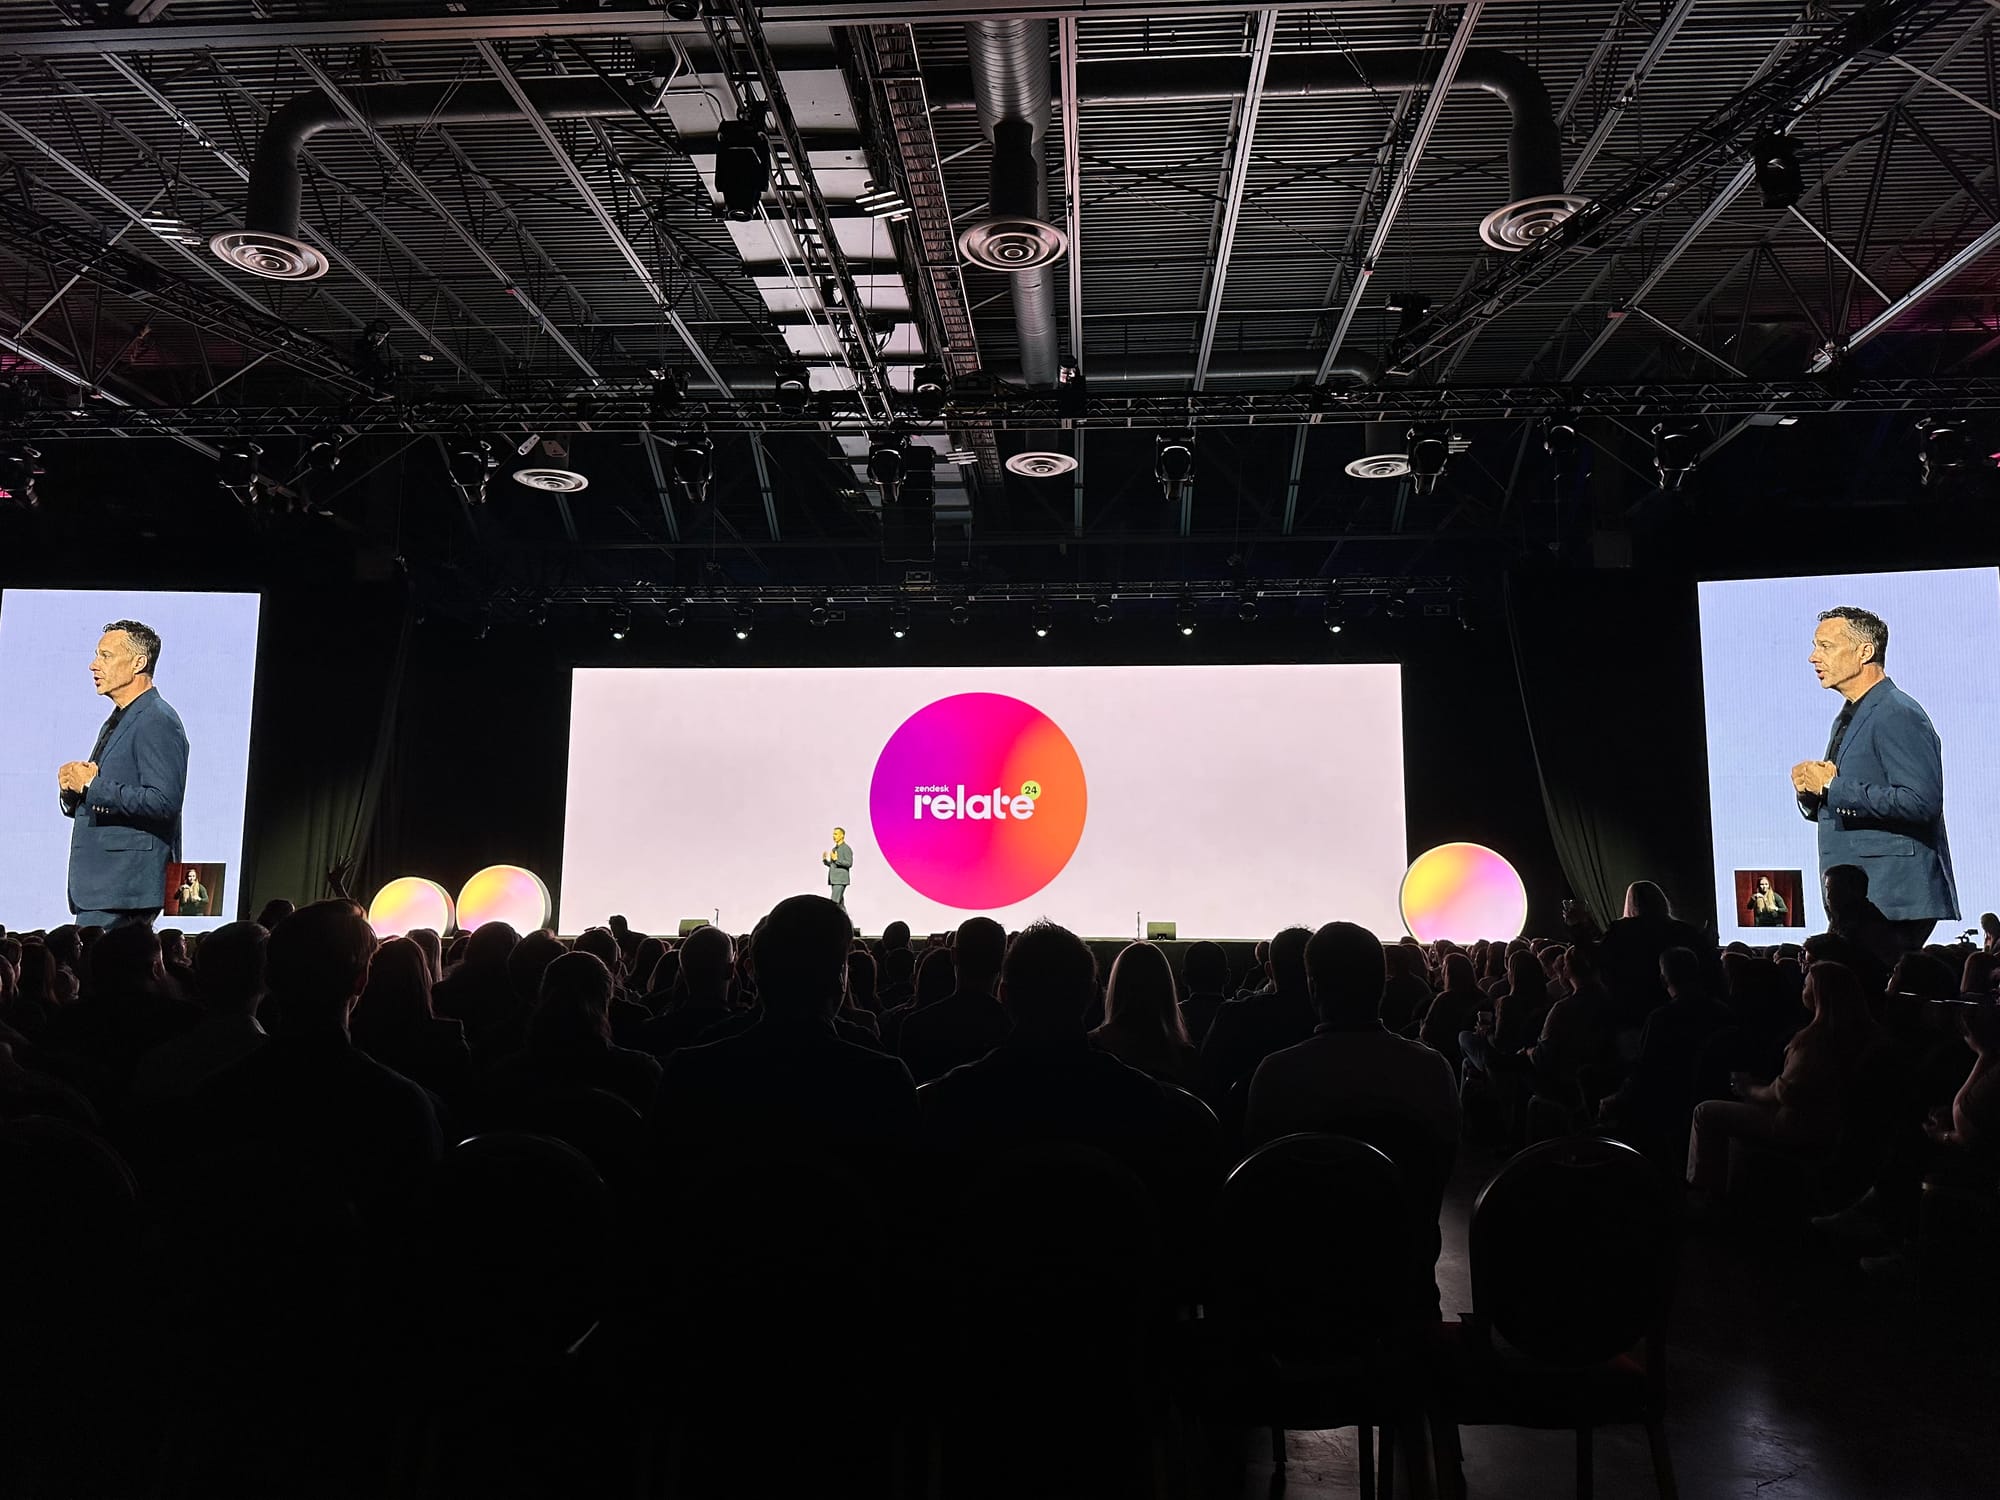 Zendesk Relate: What's available now and show floor impressions